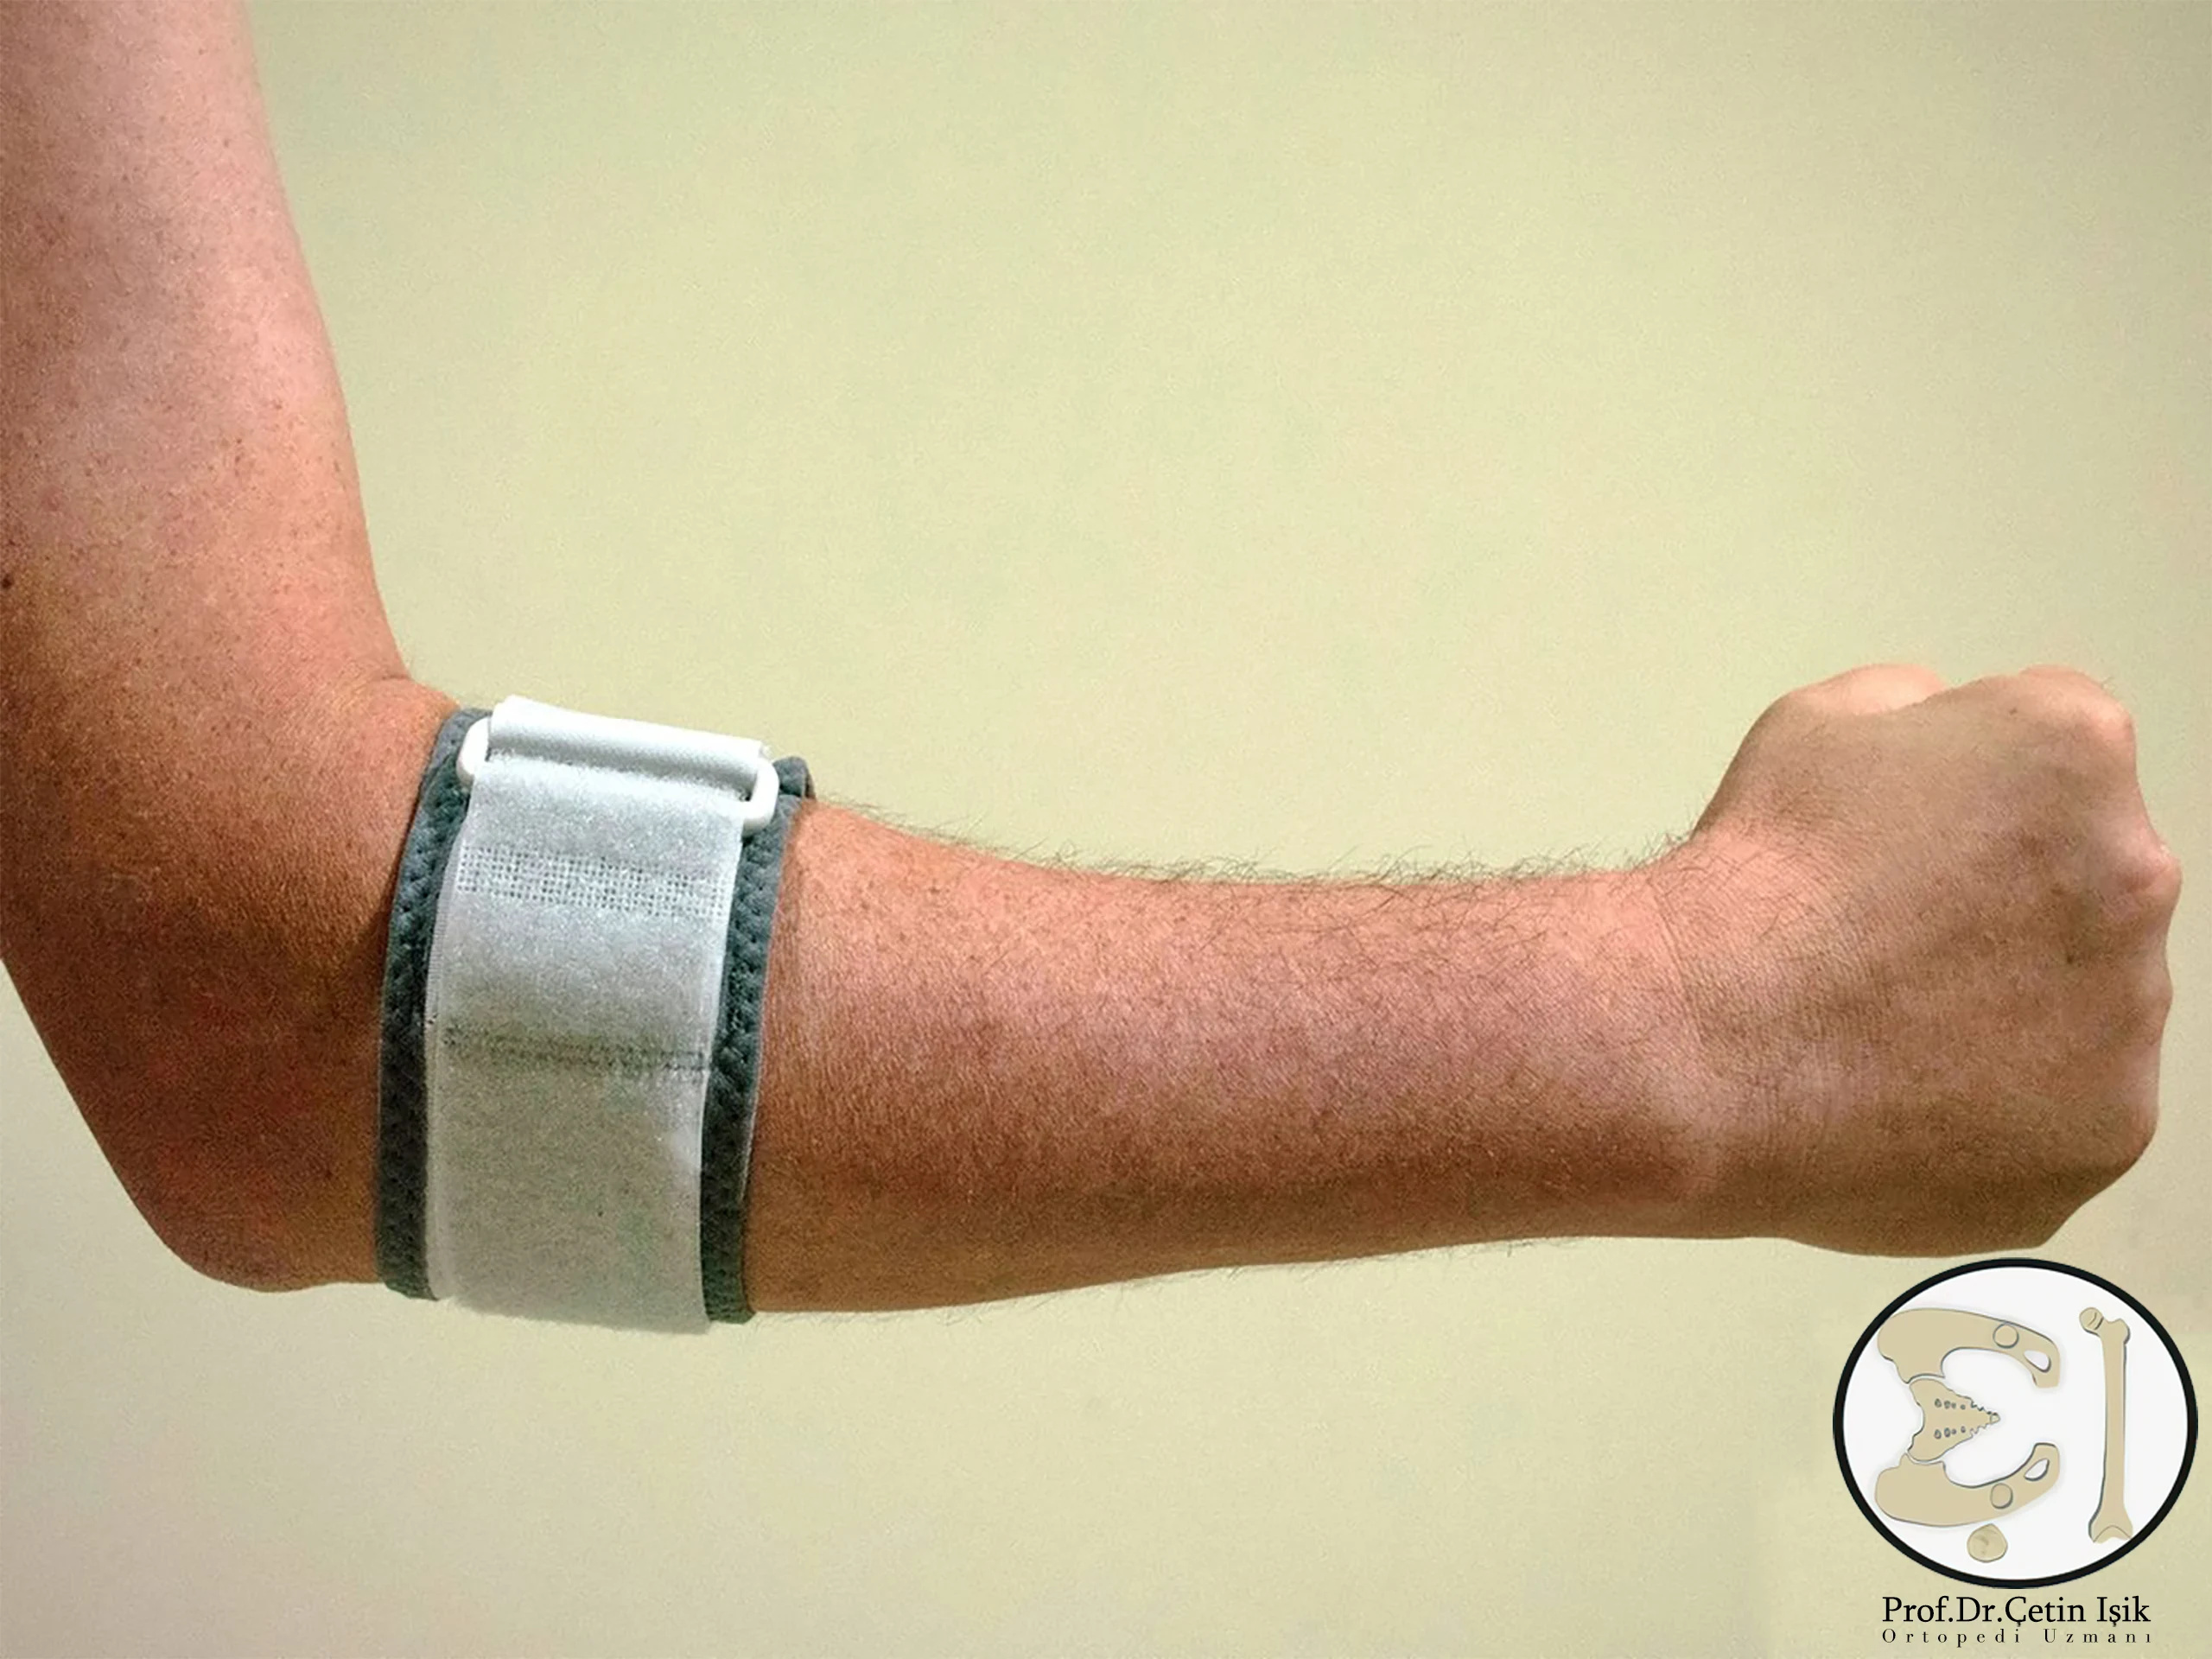 An opposite force splint used in the treatment of tennis elbow.